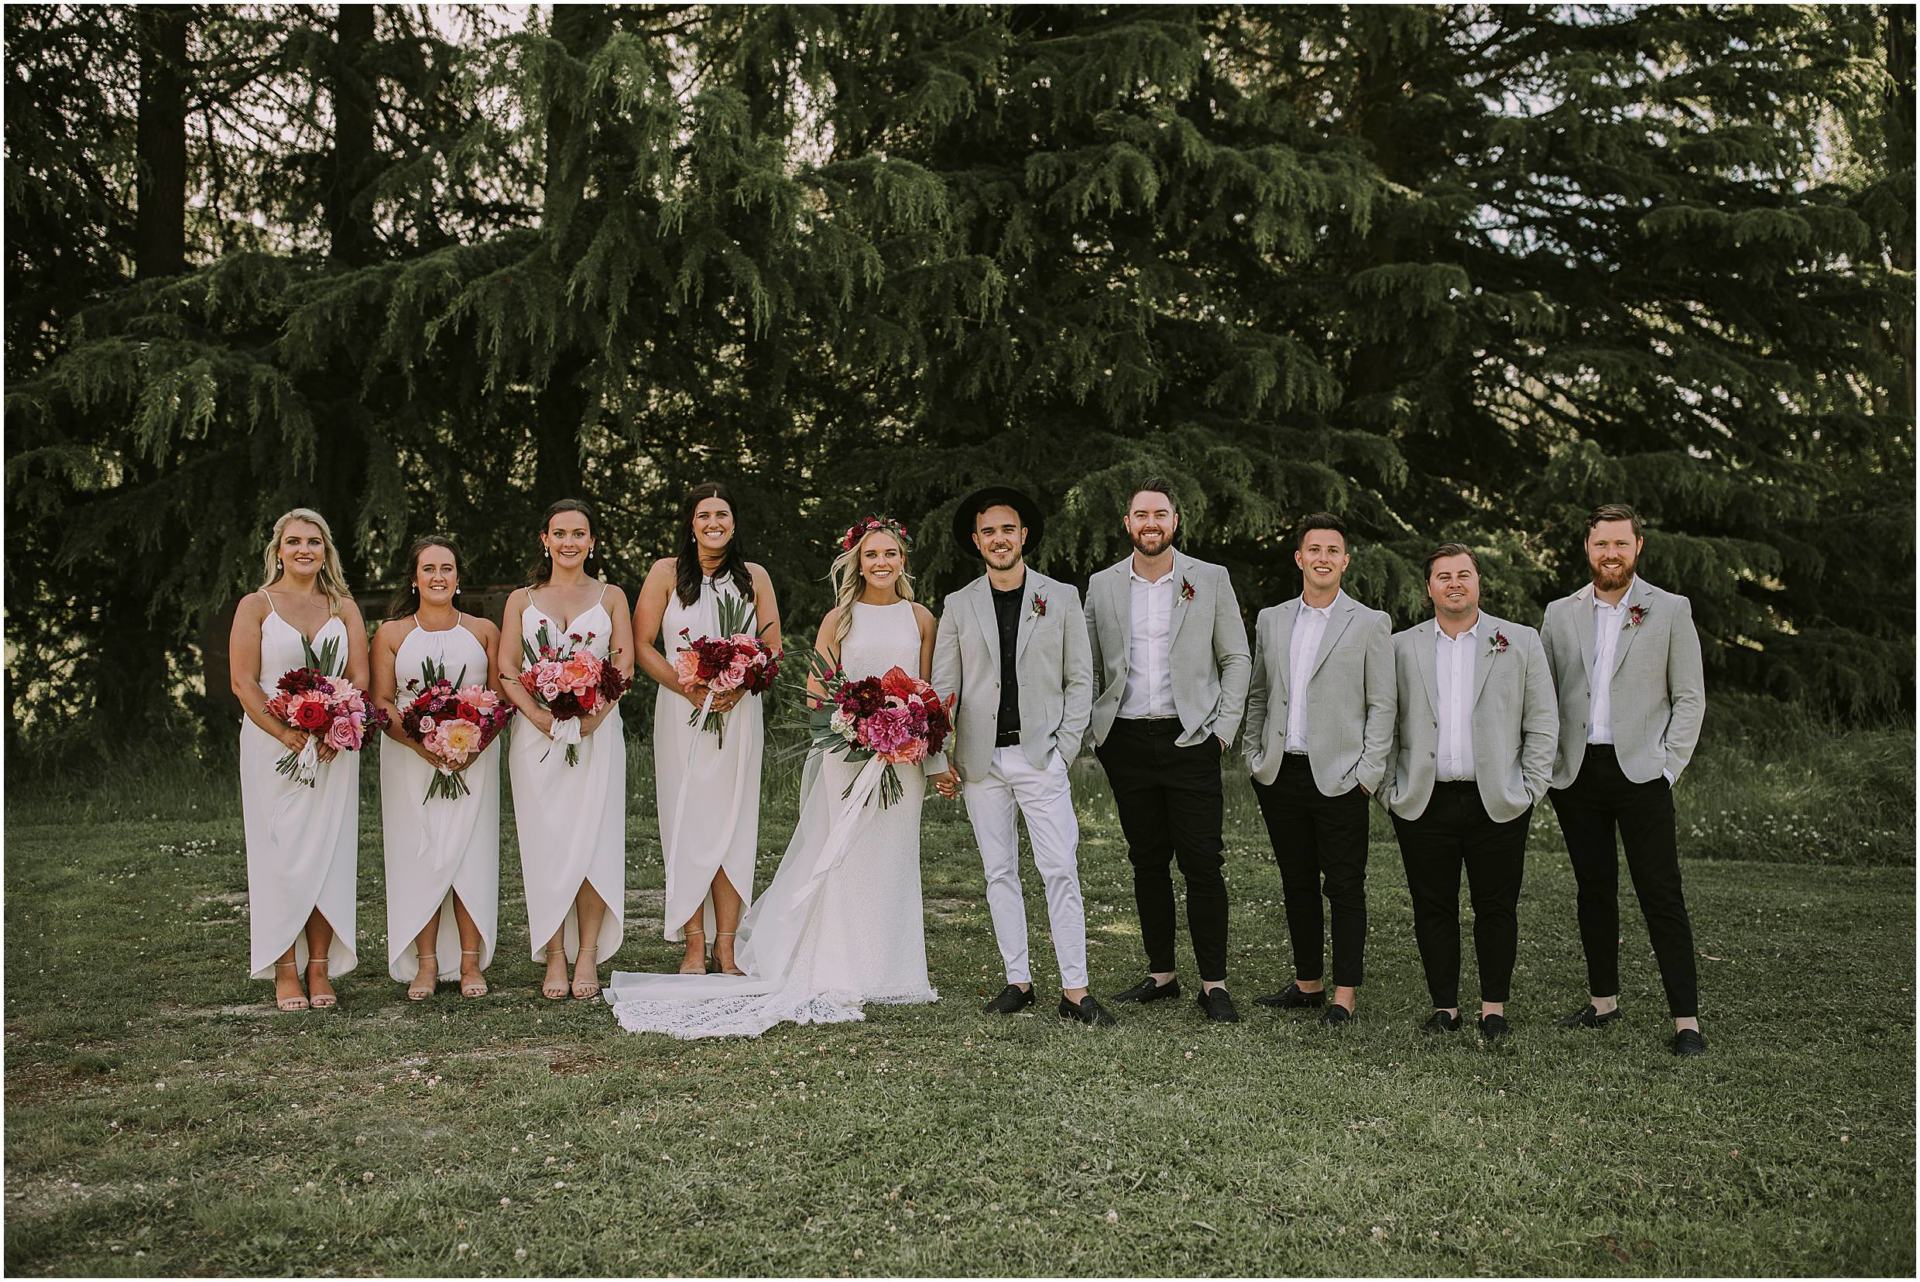 Charlotte Kiri Photography - Wedding Photography of a gorgeous bridal party, with the bride and bridesmaids wearing crisp white dresses with red, pink, and peach bouquets, and the groom wearing smart white pants, a grey jacket, and black shirt and hat, alongside his groomsmen with black pants, white shirts, and grey jackets, as they pose in front of a line of trees. in Wanaka, New Zealand